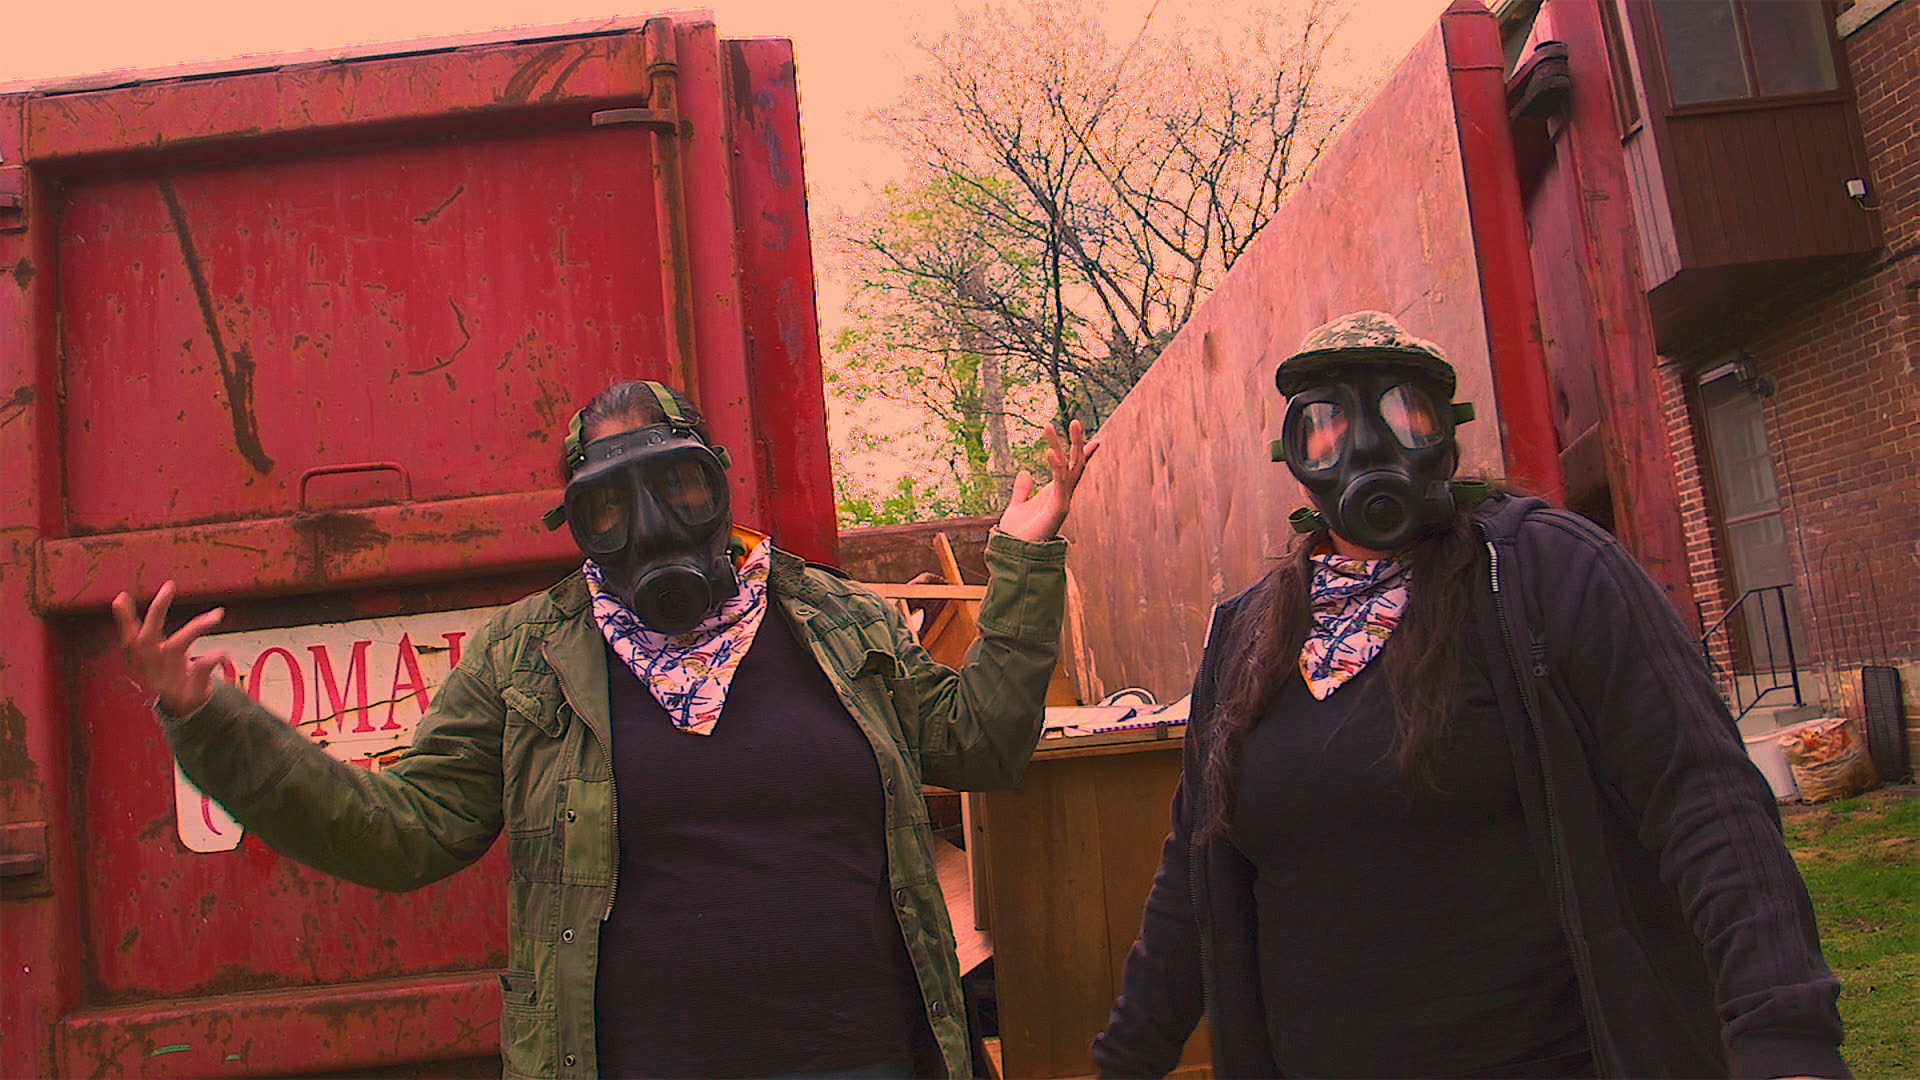 Image Description: Two women stand outside of a brick building. They are both wearing jackets, black T-shirts, colorful scarves around their necks, and gas masks that obscure most of their faces.